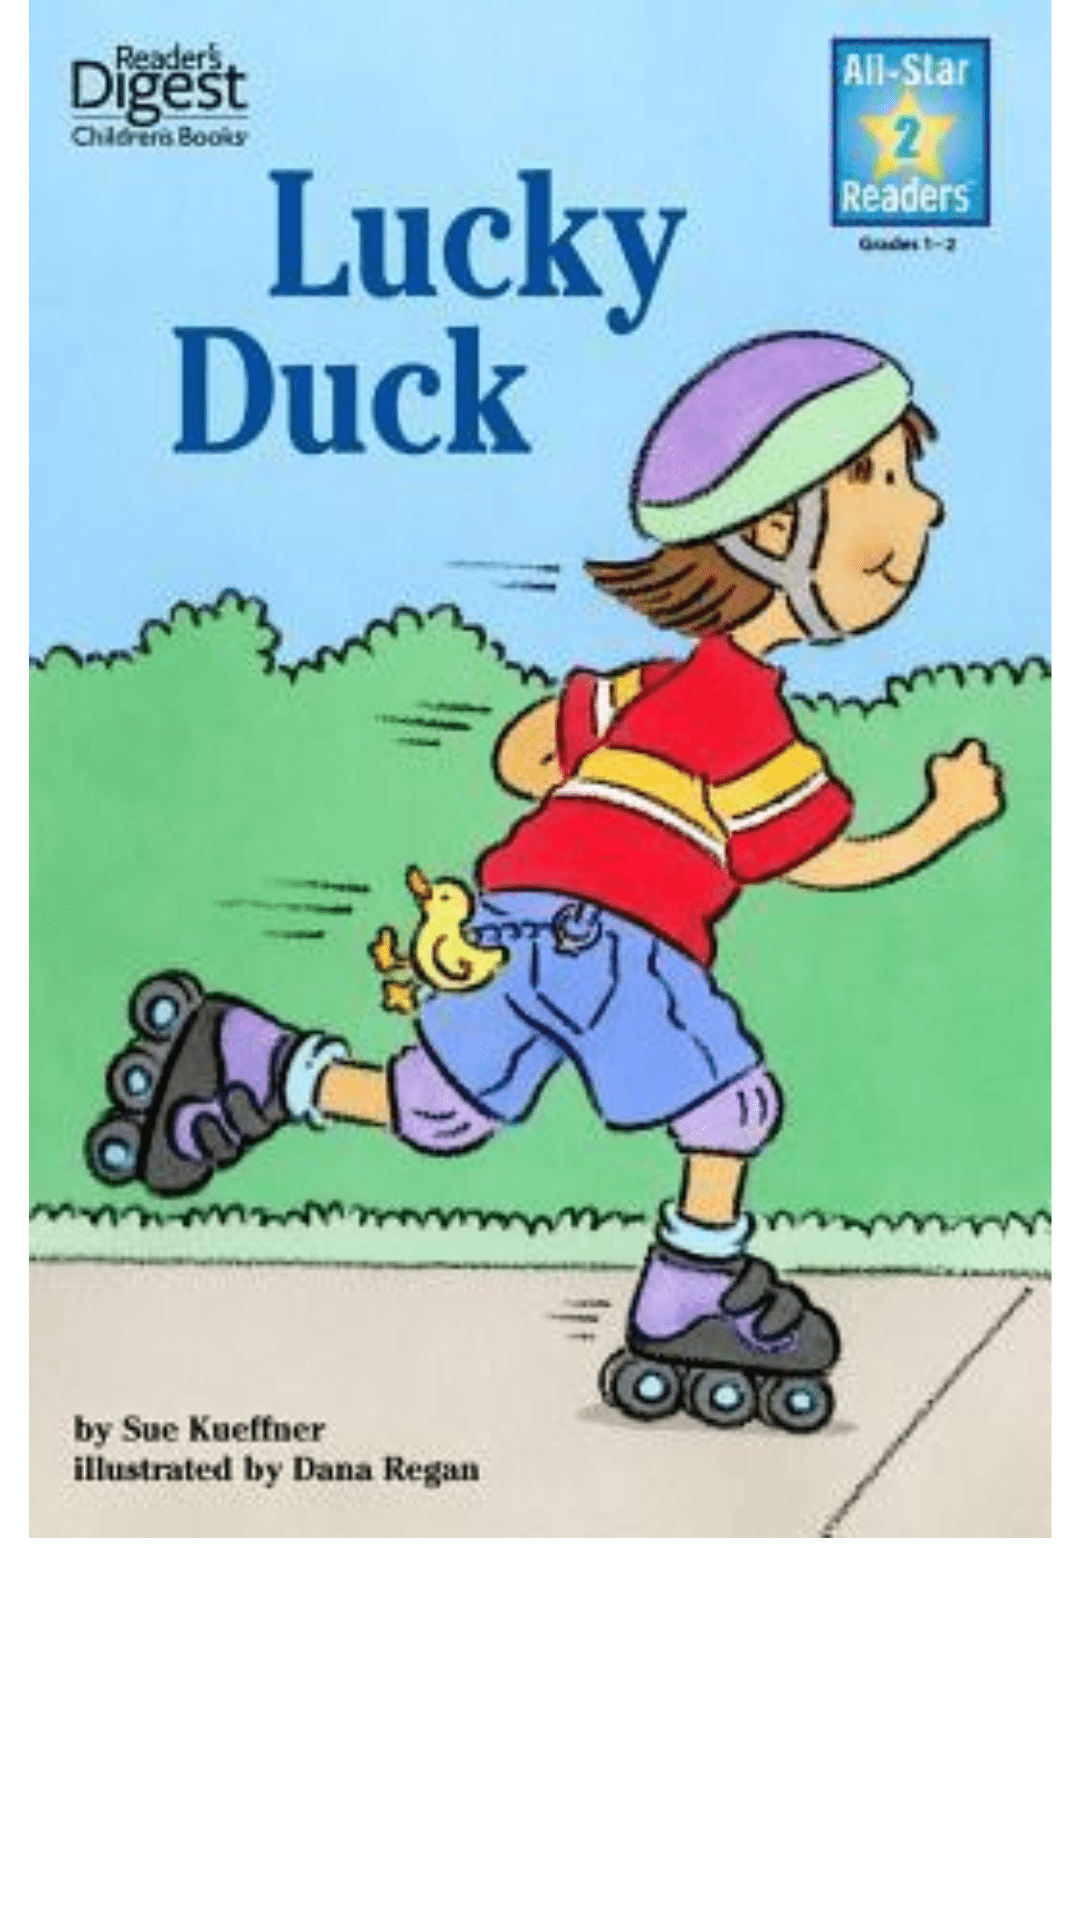 Lucky Duck by Sue Kueffner